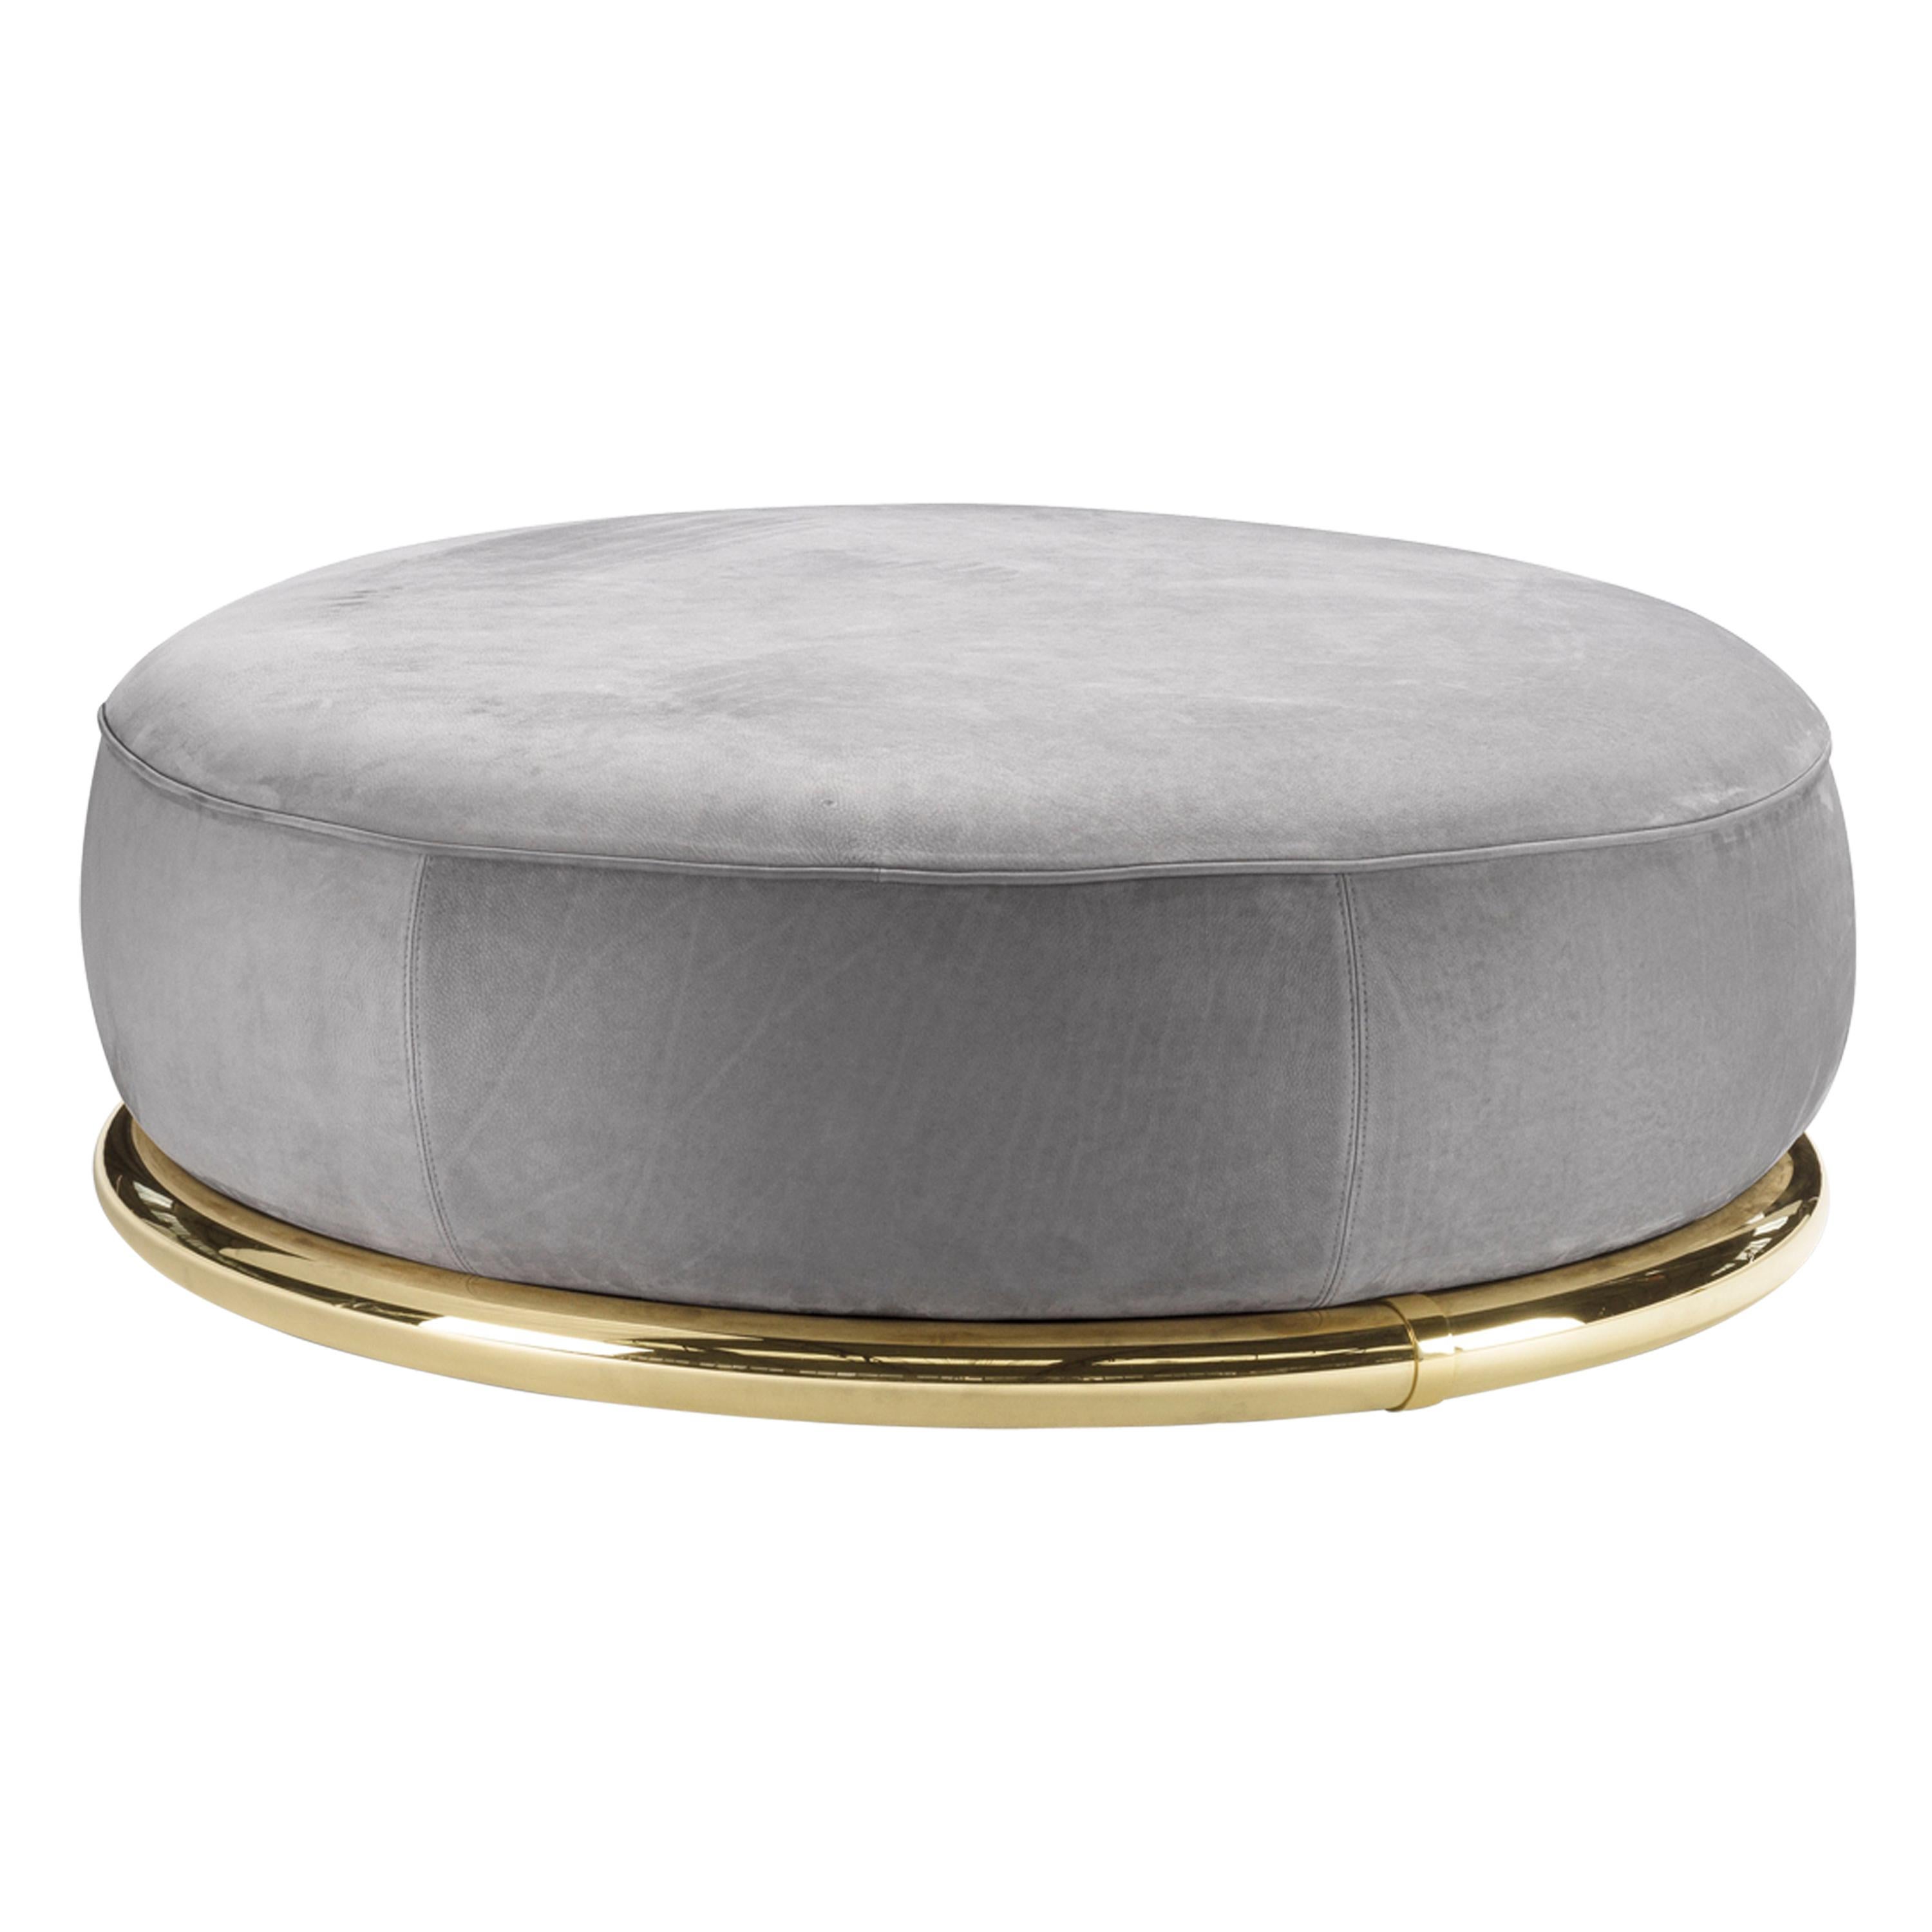 Abbracci Ottoman in Grey Leather with Polished Brass Legs